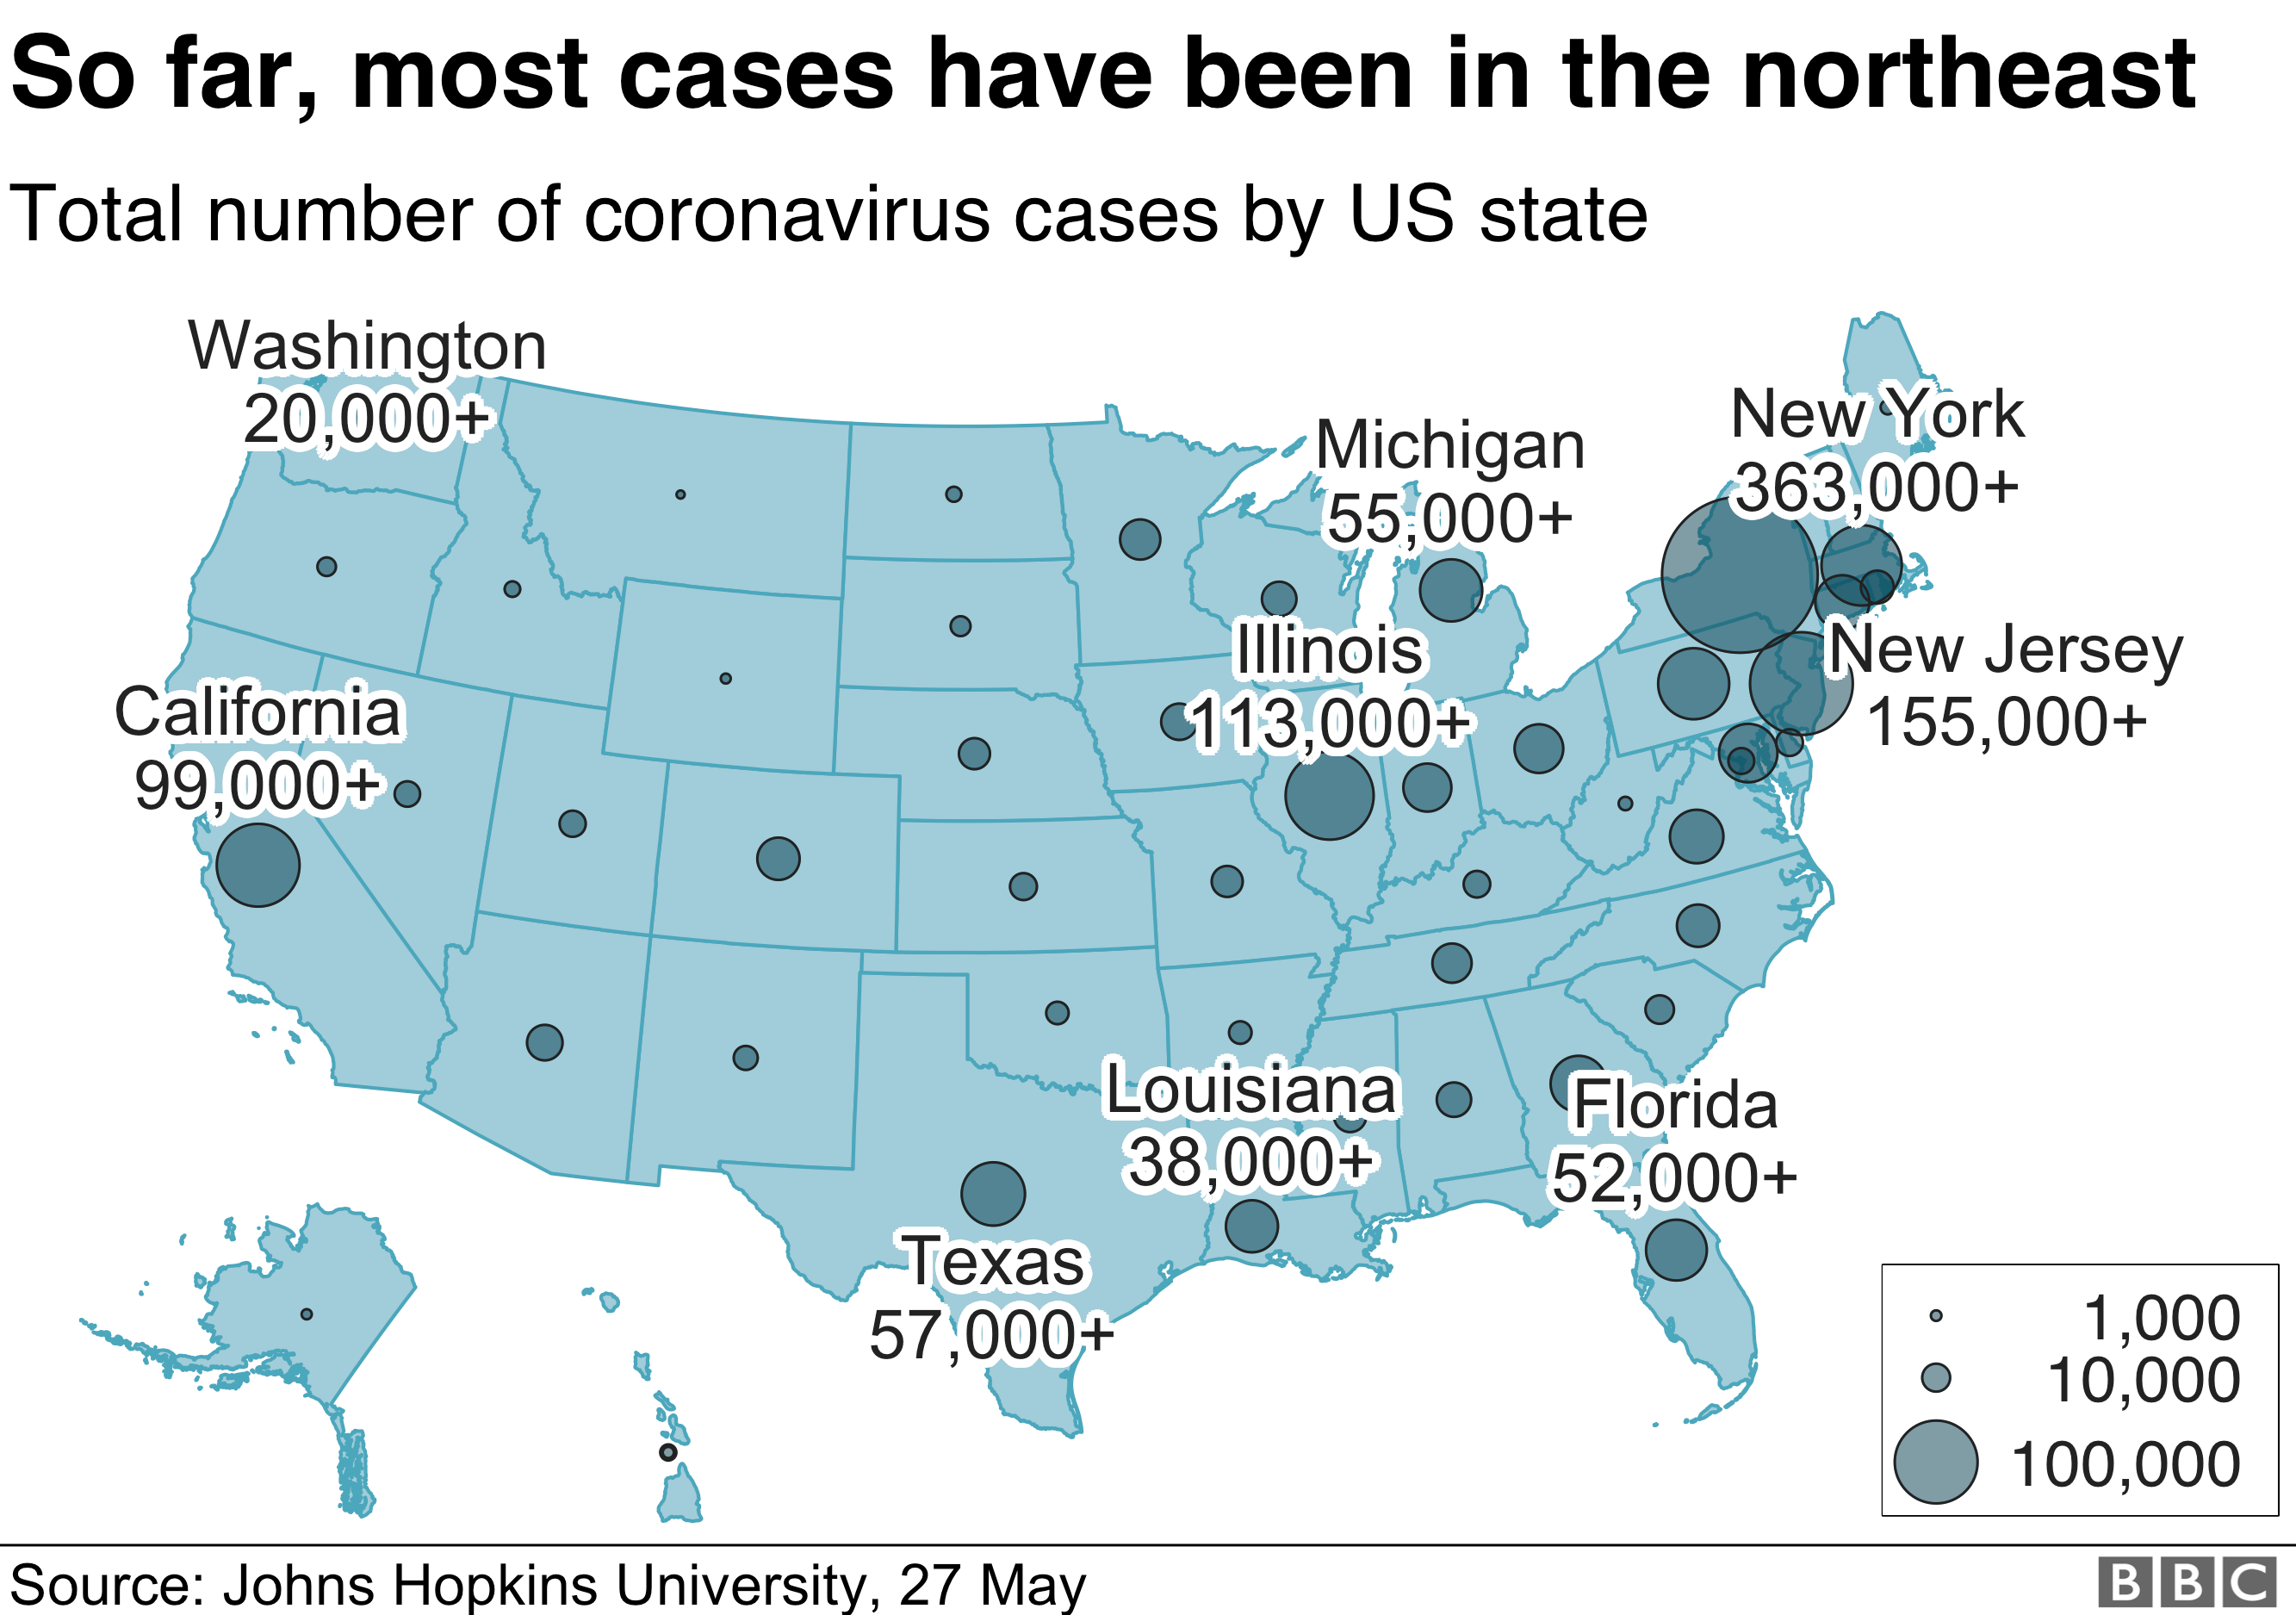 Map showing the total number of coronavirus cases by US state. At the moment, the overwhelming majority have been in the northeast of the country